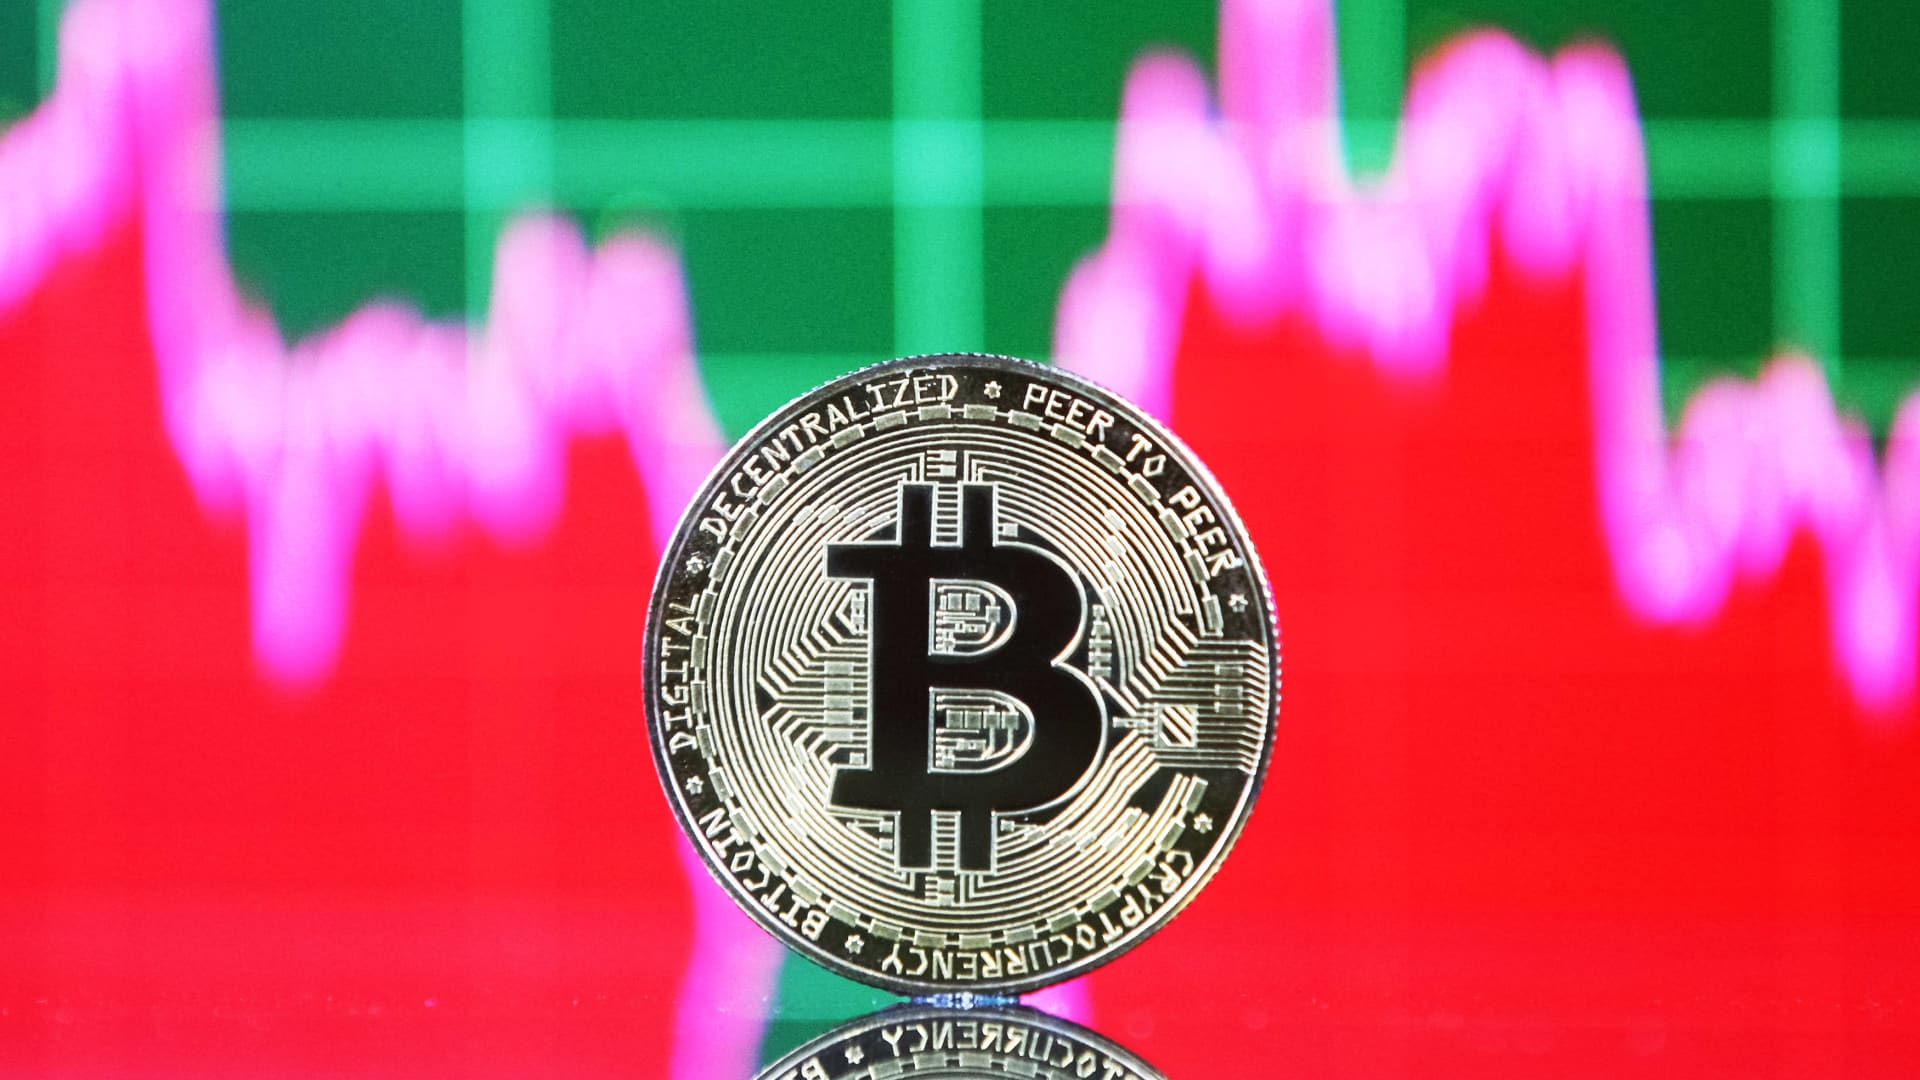 Bitcoin breaks above $27,000 for the first time in September